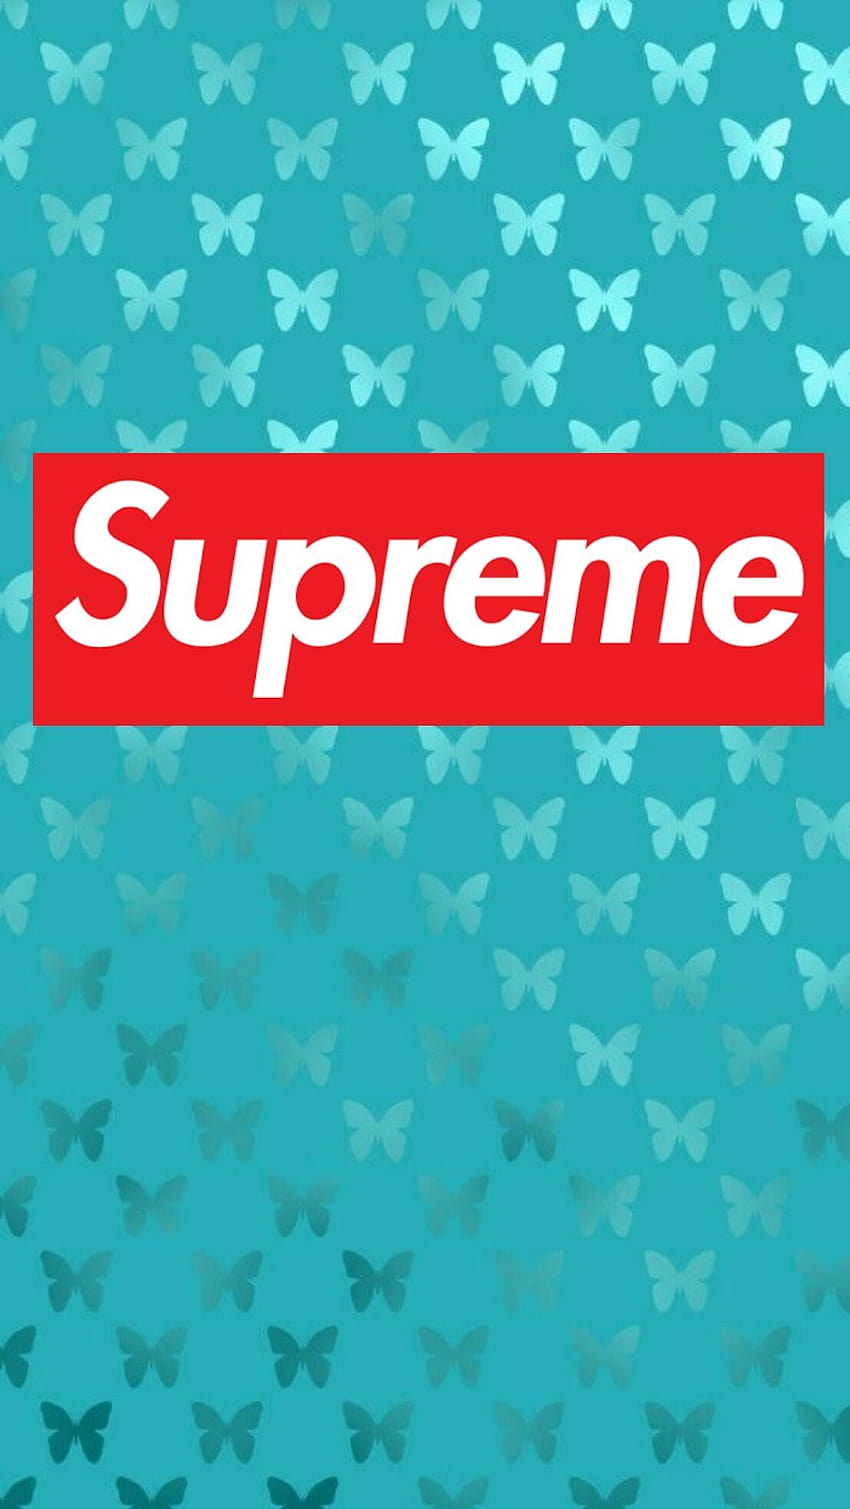 Supreme Water wallpaper by Aztr0  Download on ZEDGE  8968